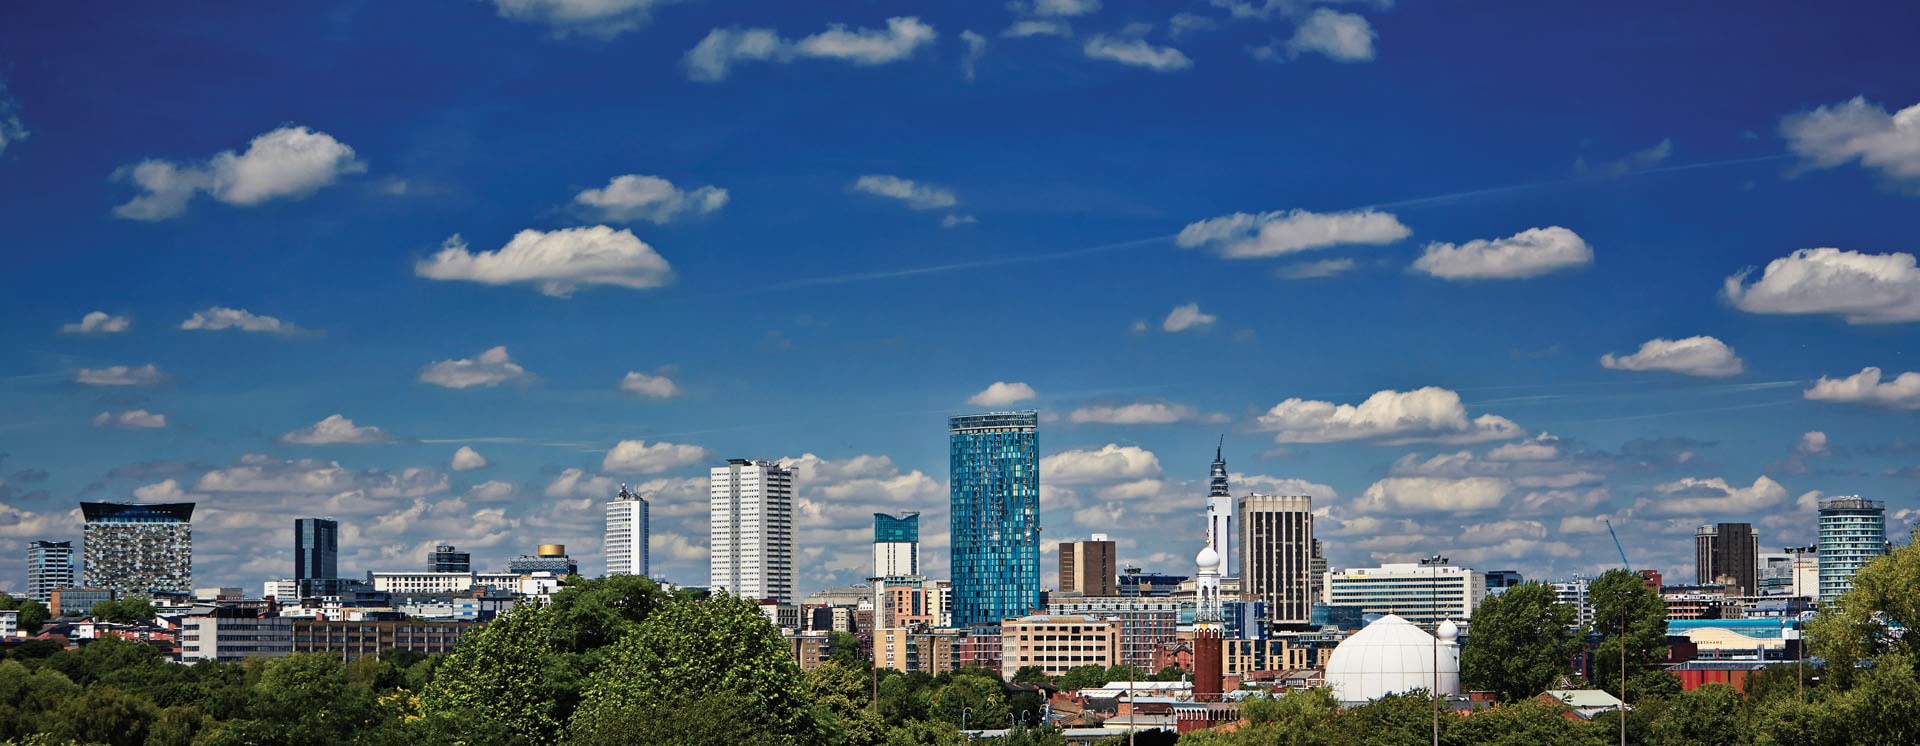 Birmingham skyline against a blue sky with white clouds